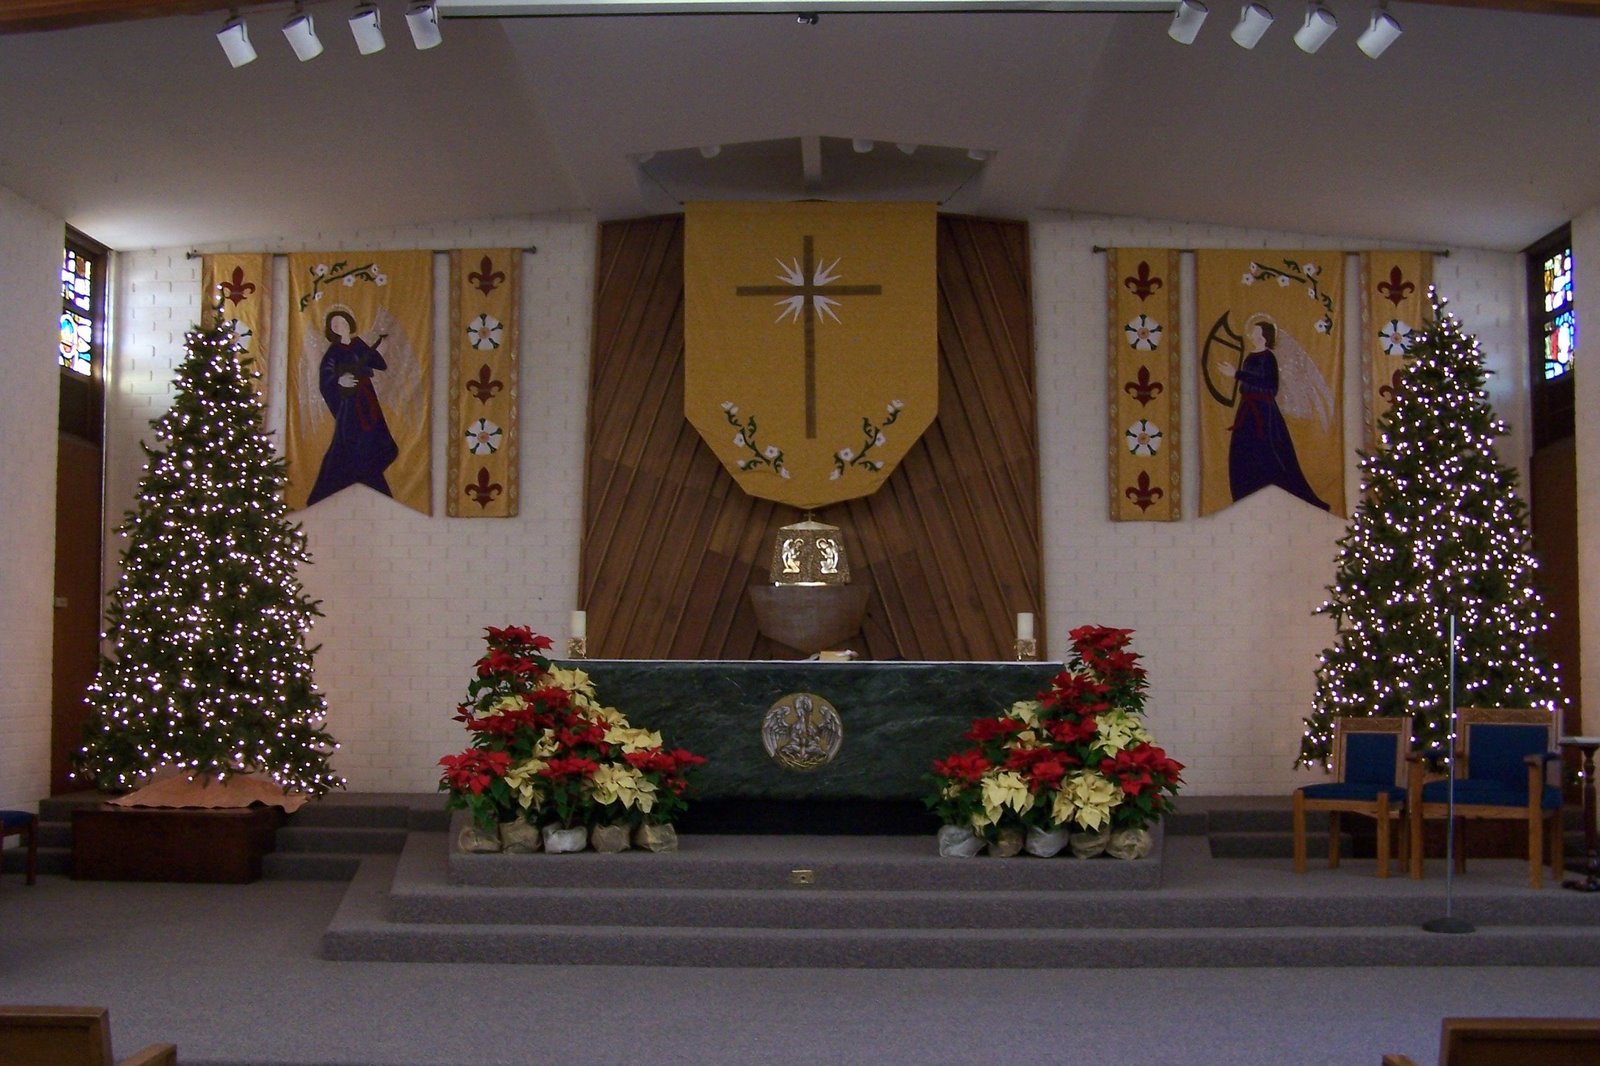 [Christmas+banners+in+the+church.jpg]